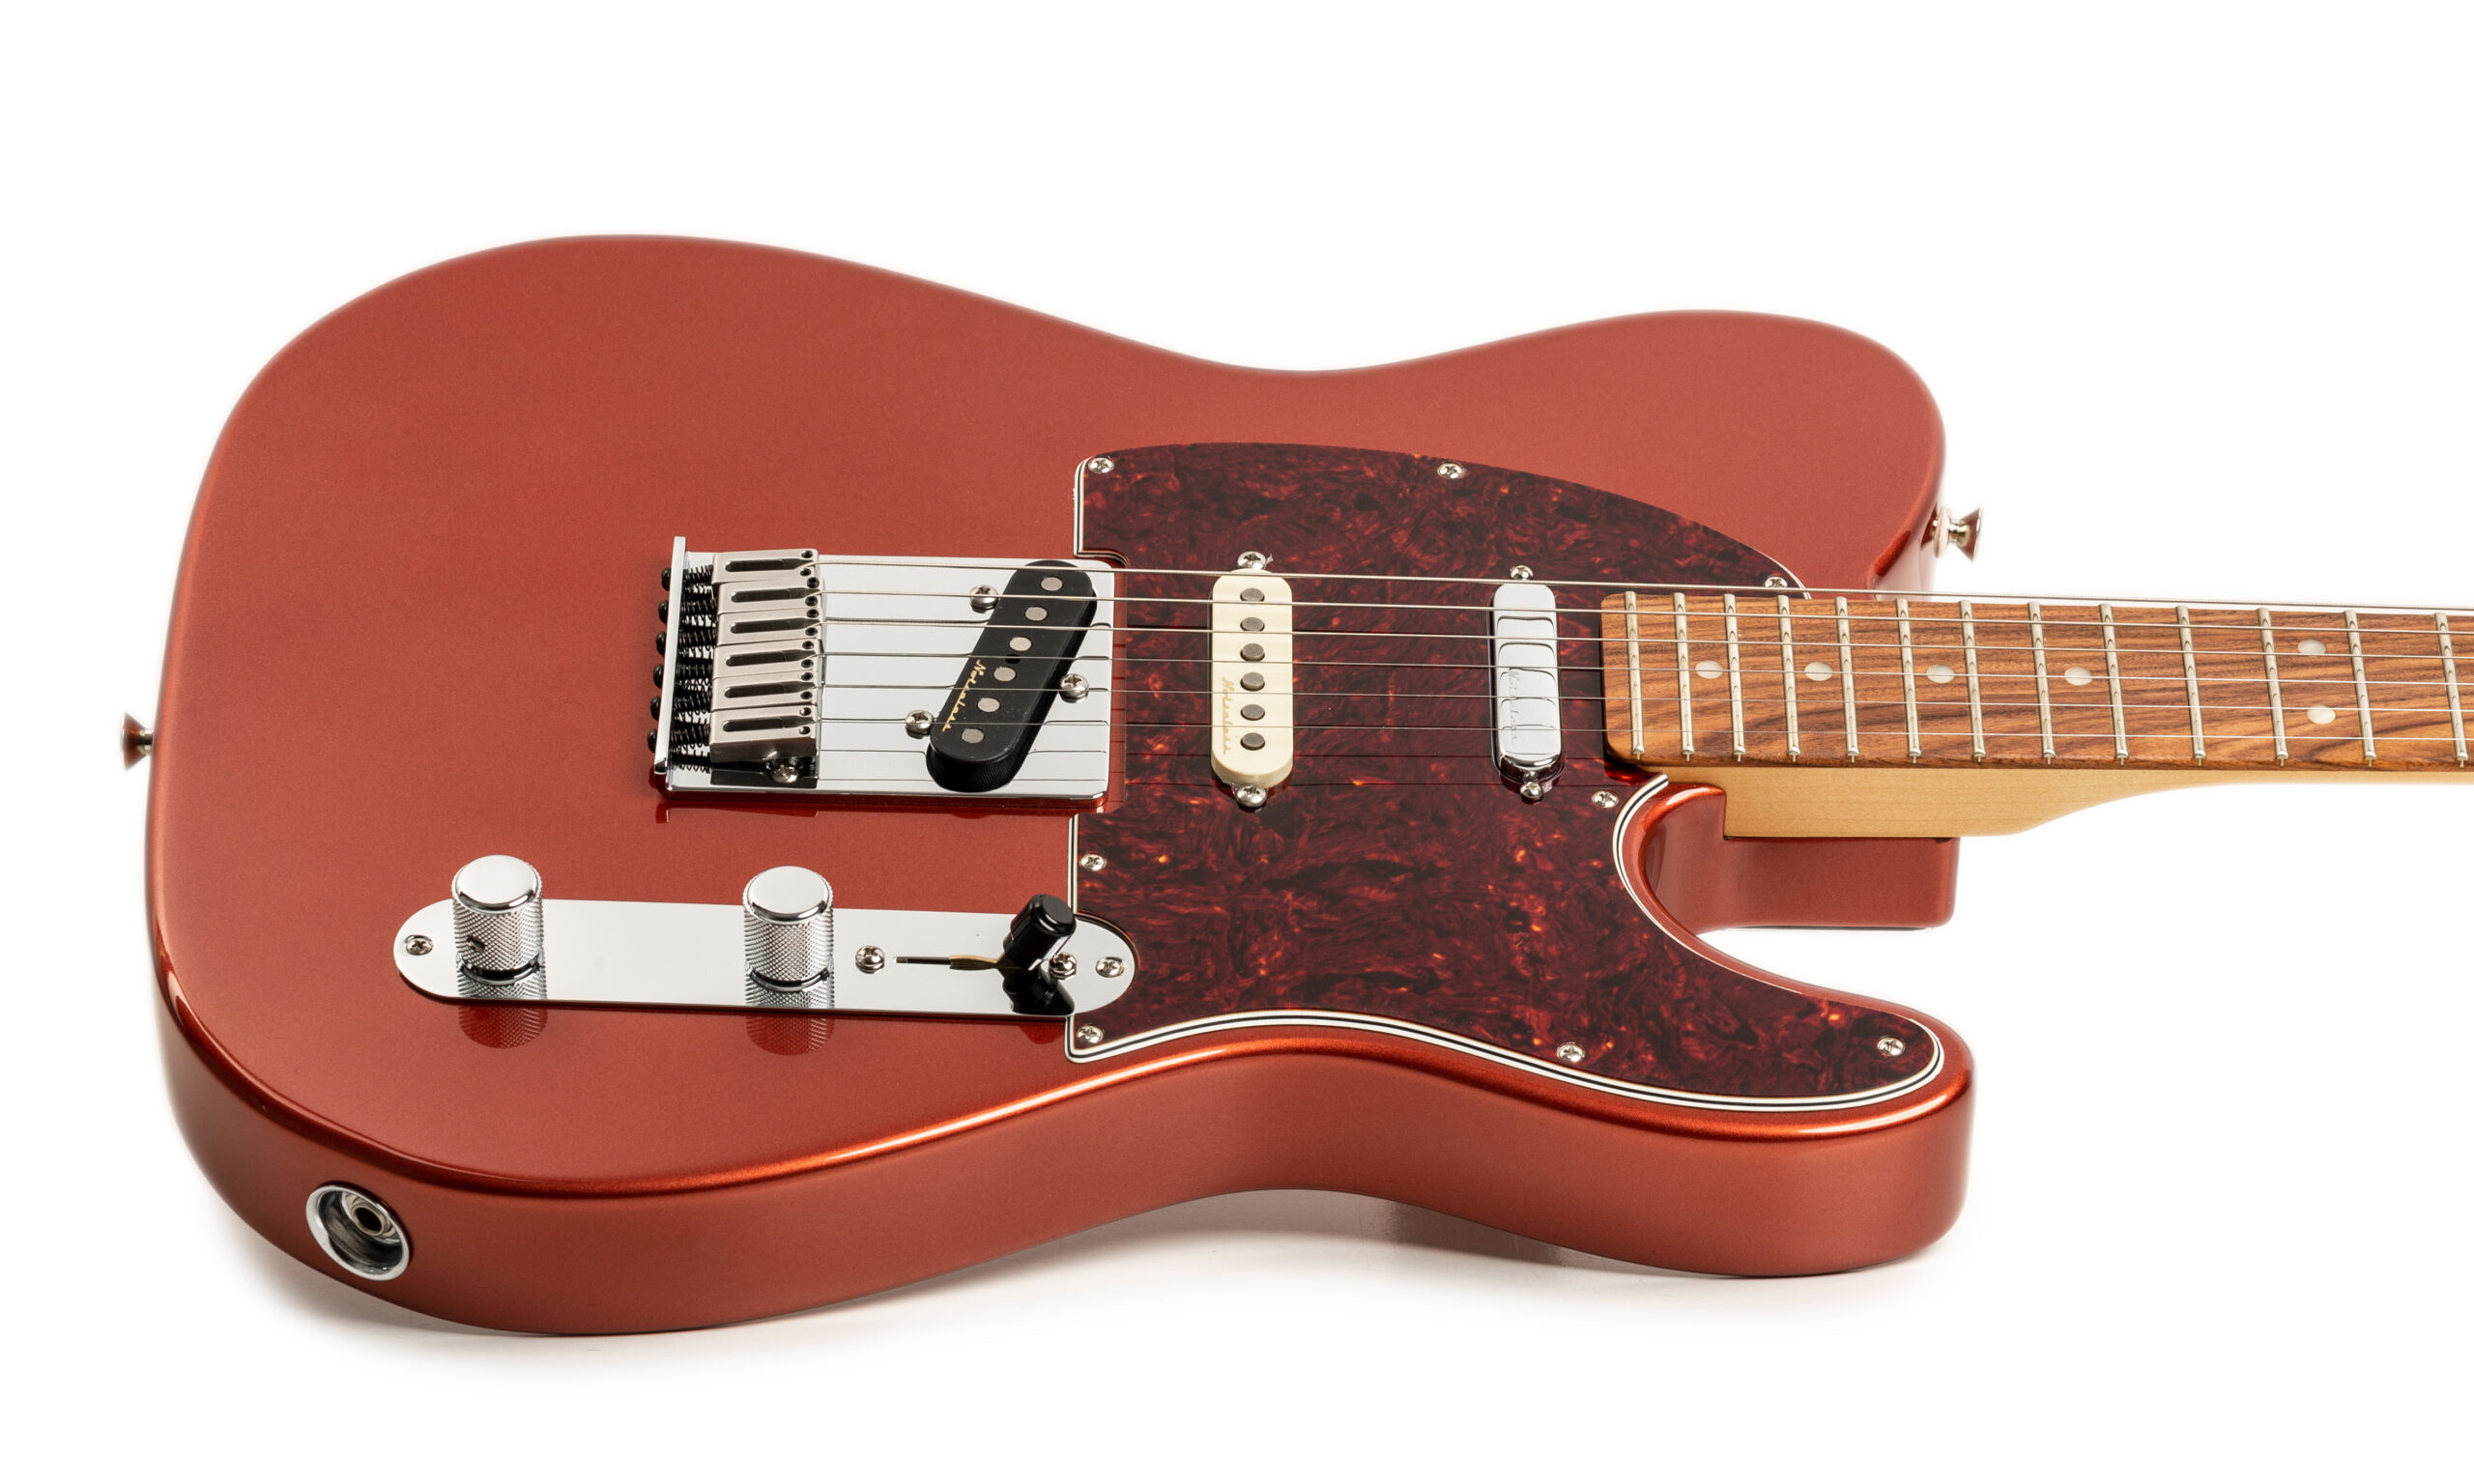 Fender_Player_Plus_Nashville_Telecaster_Aged_Candy_Apple_Red_005_FIN-scaled.jpg